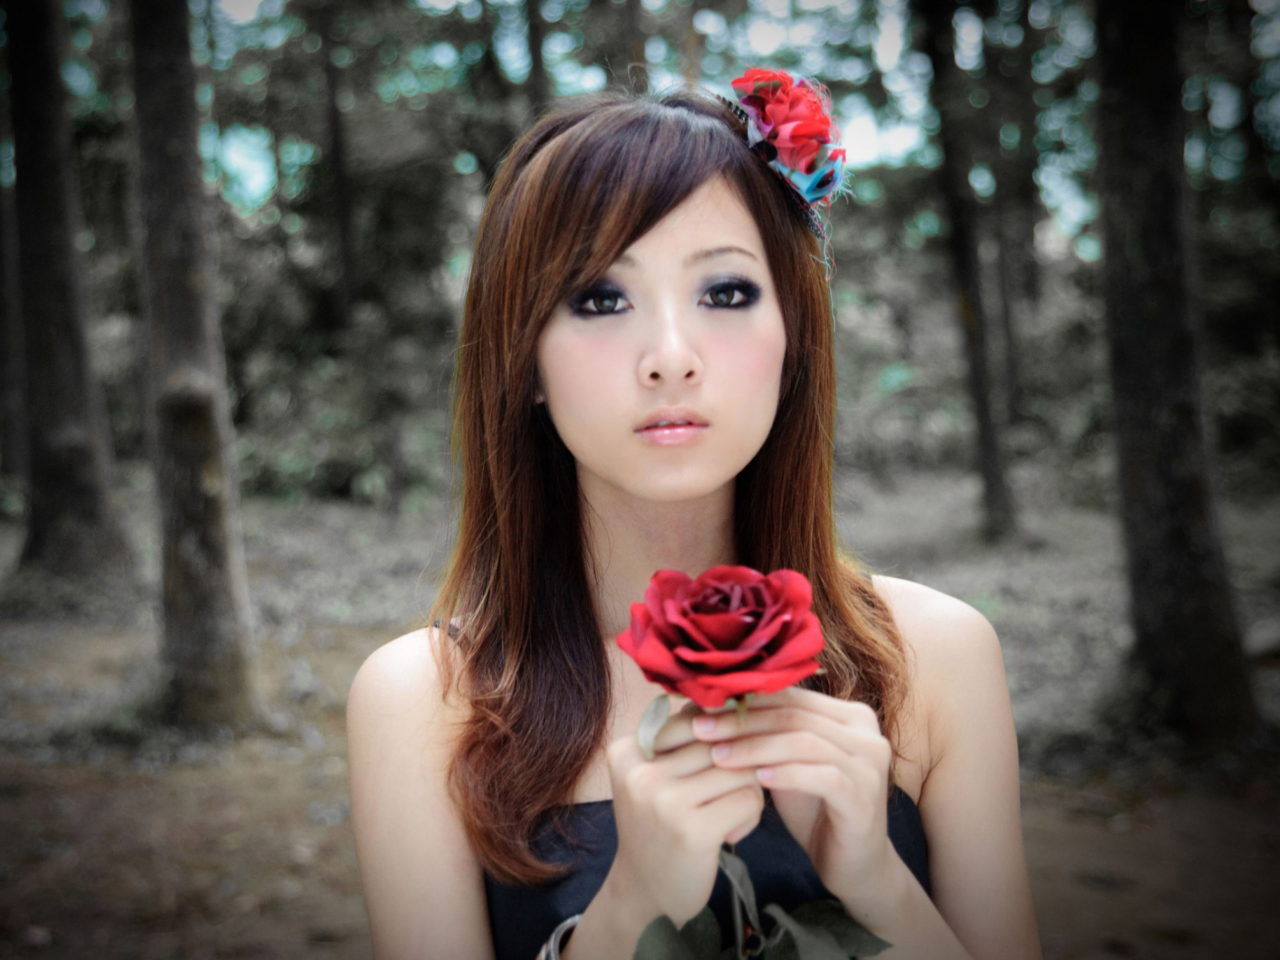 Asian Girl With Red Rose screenshot #1 1280x960